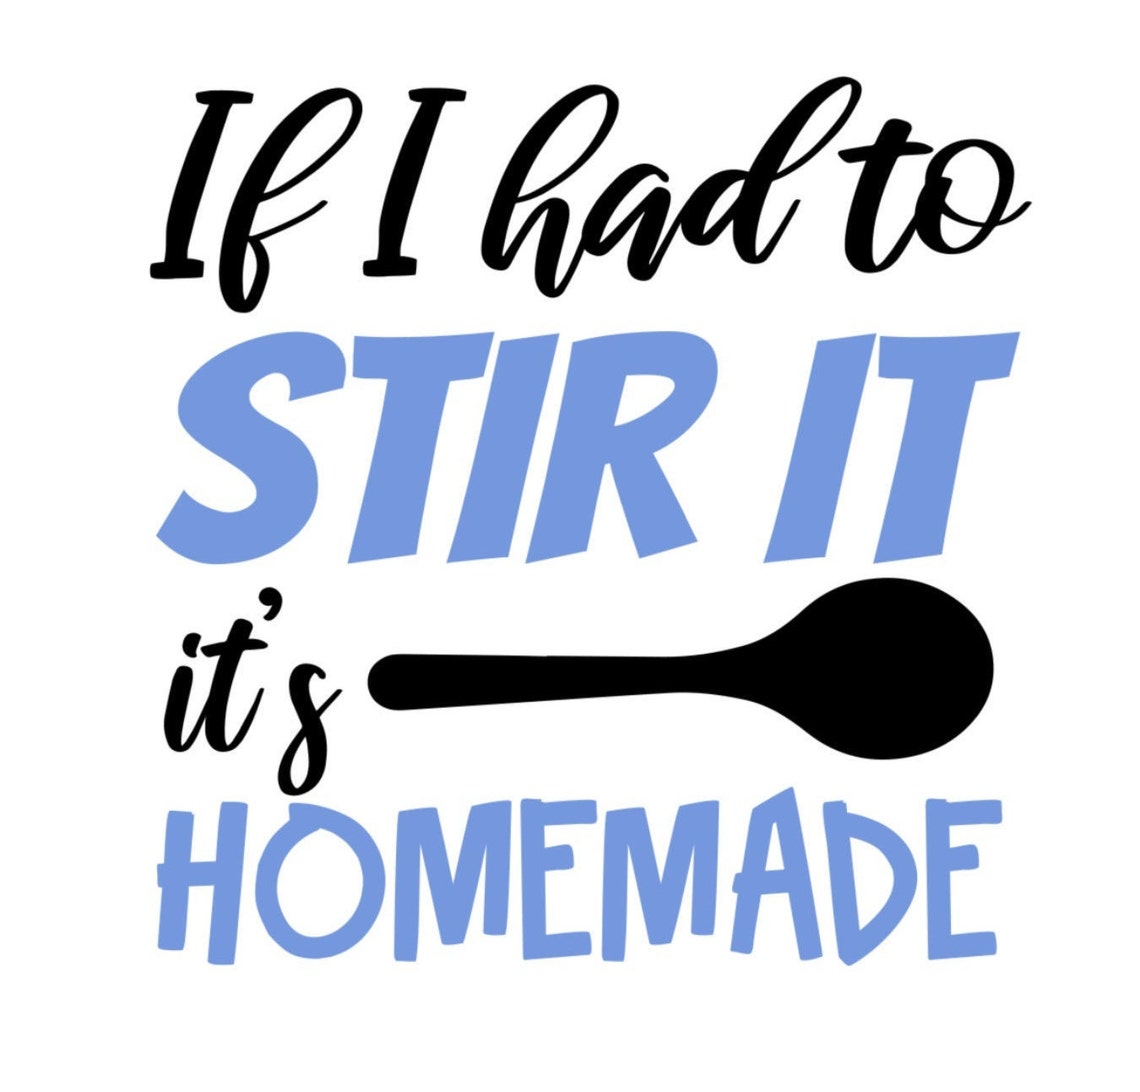 If I Had to Stir It It's Homemade SVG | Etsy